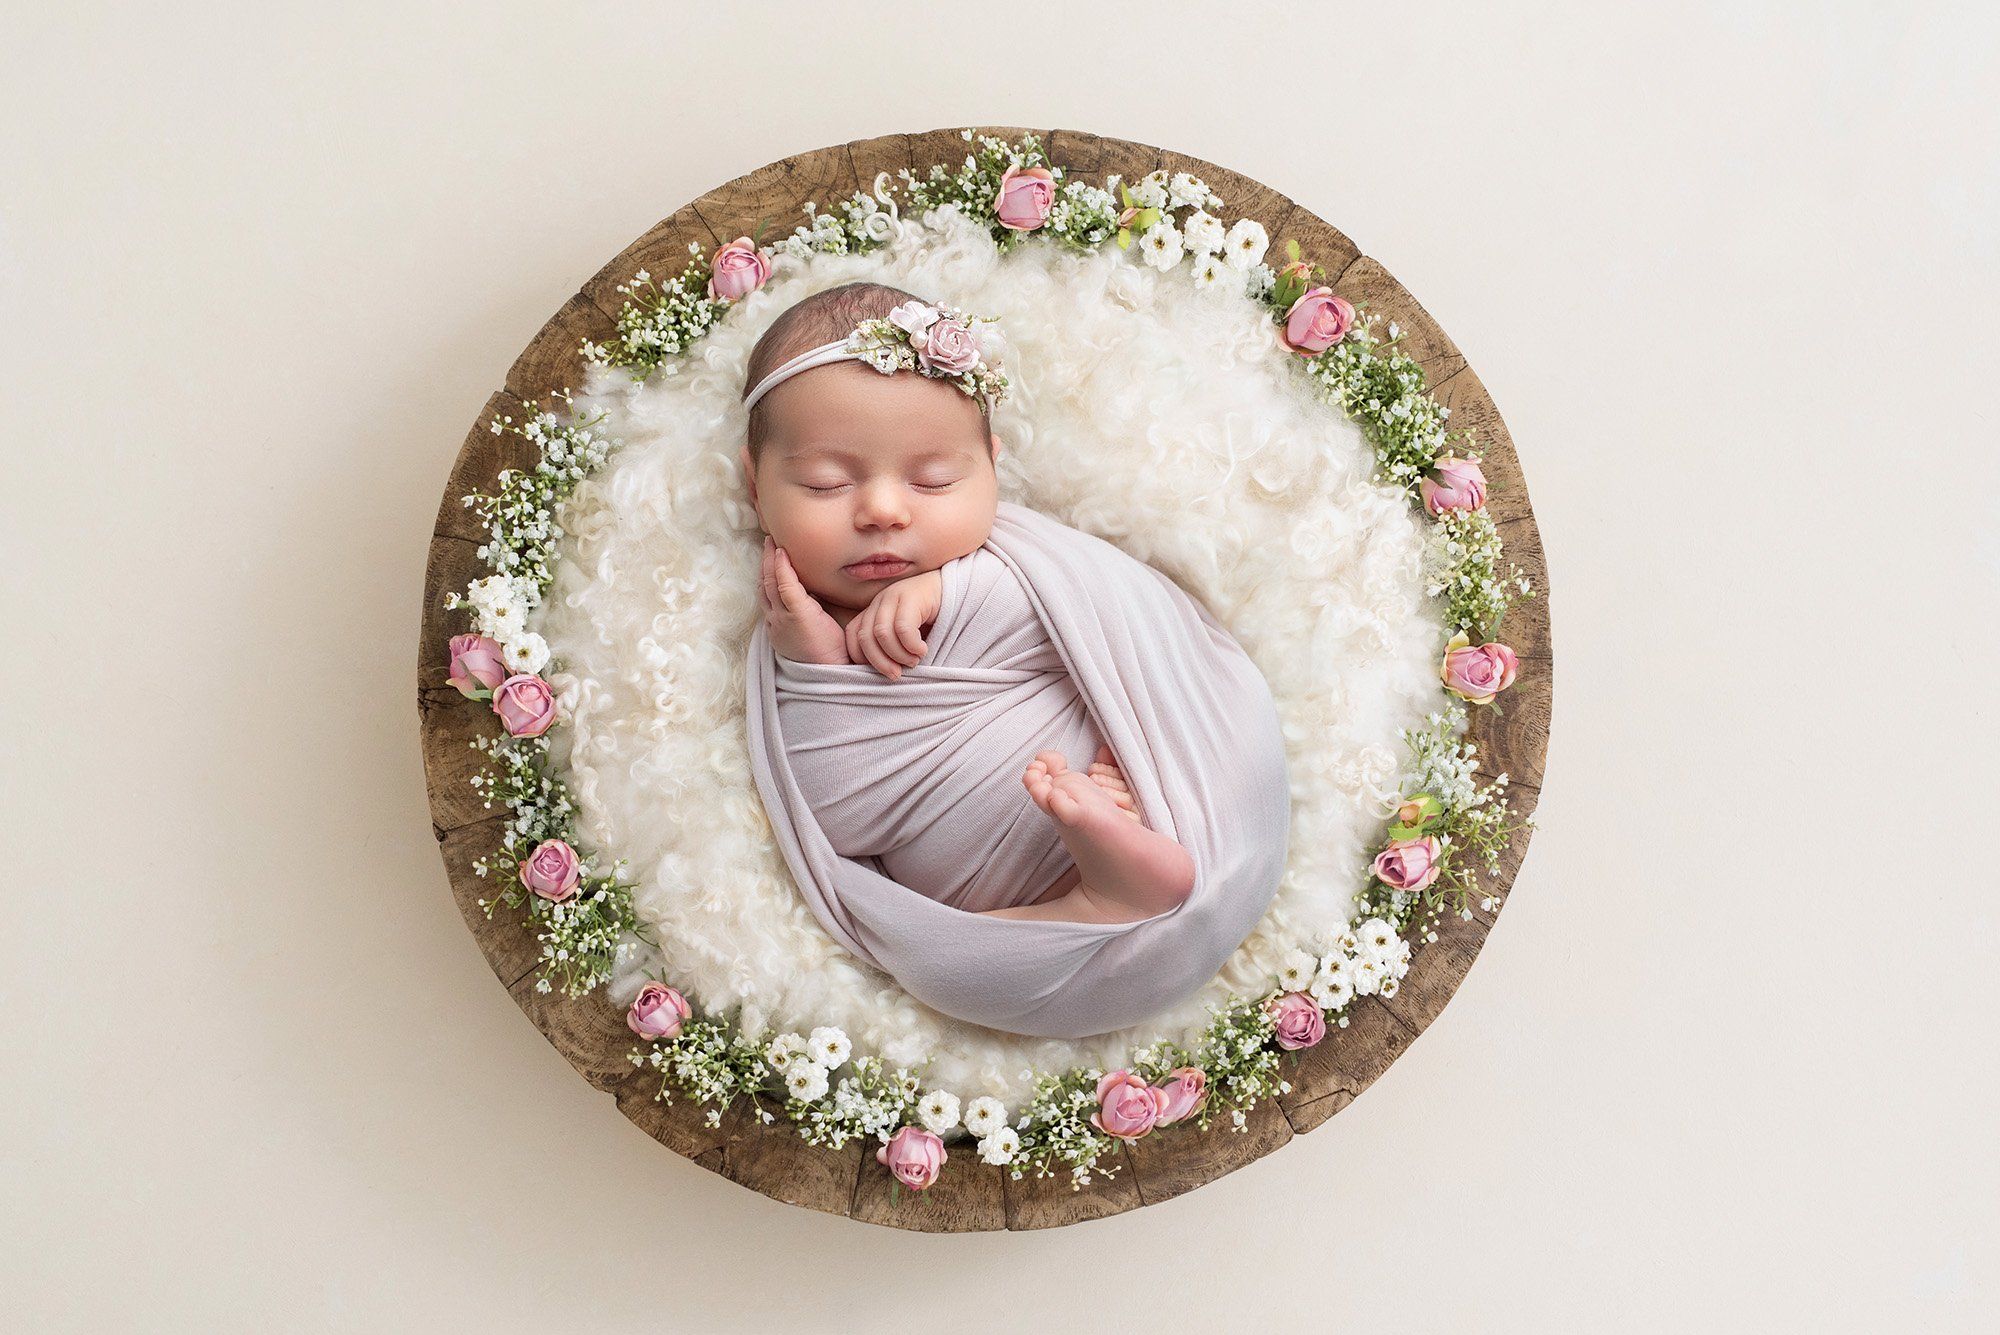 newborn baby girl asleep in wooden bowl atop a fluffy white blanket surrounded by pink roses and baby's breath